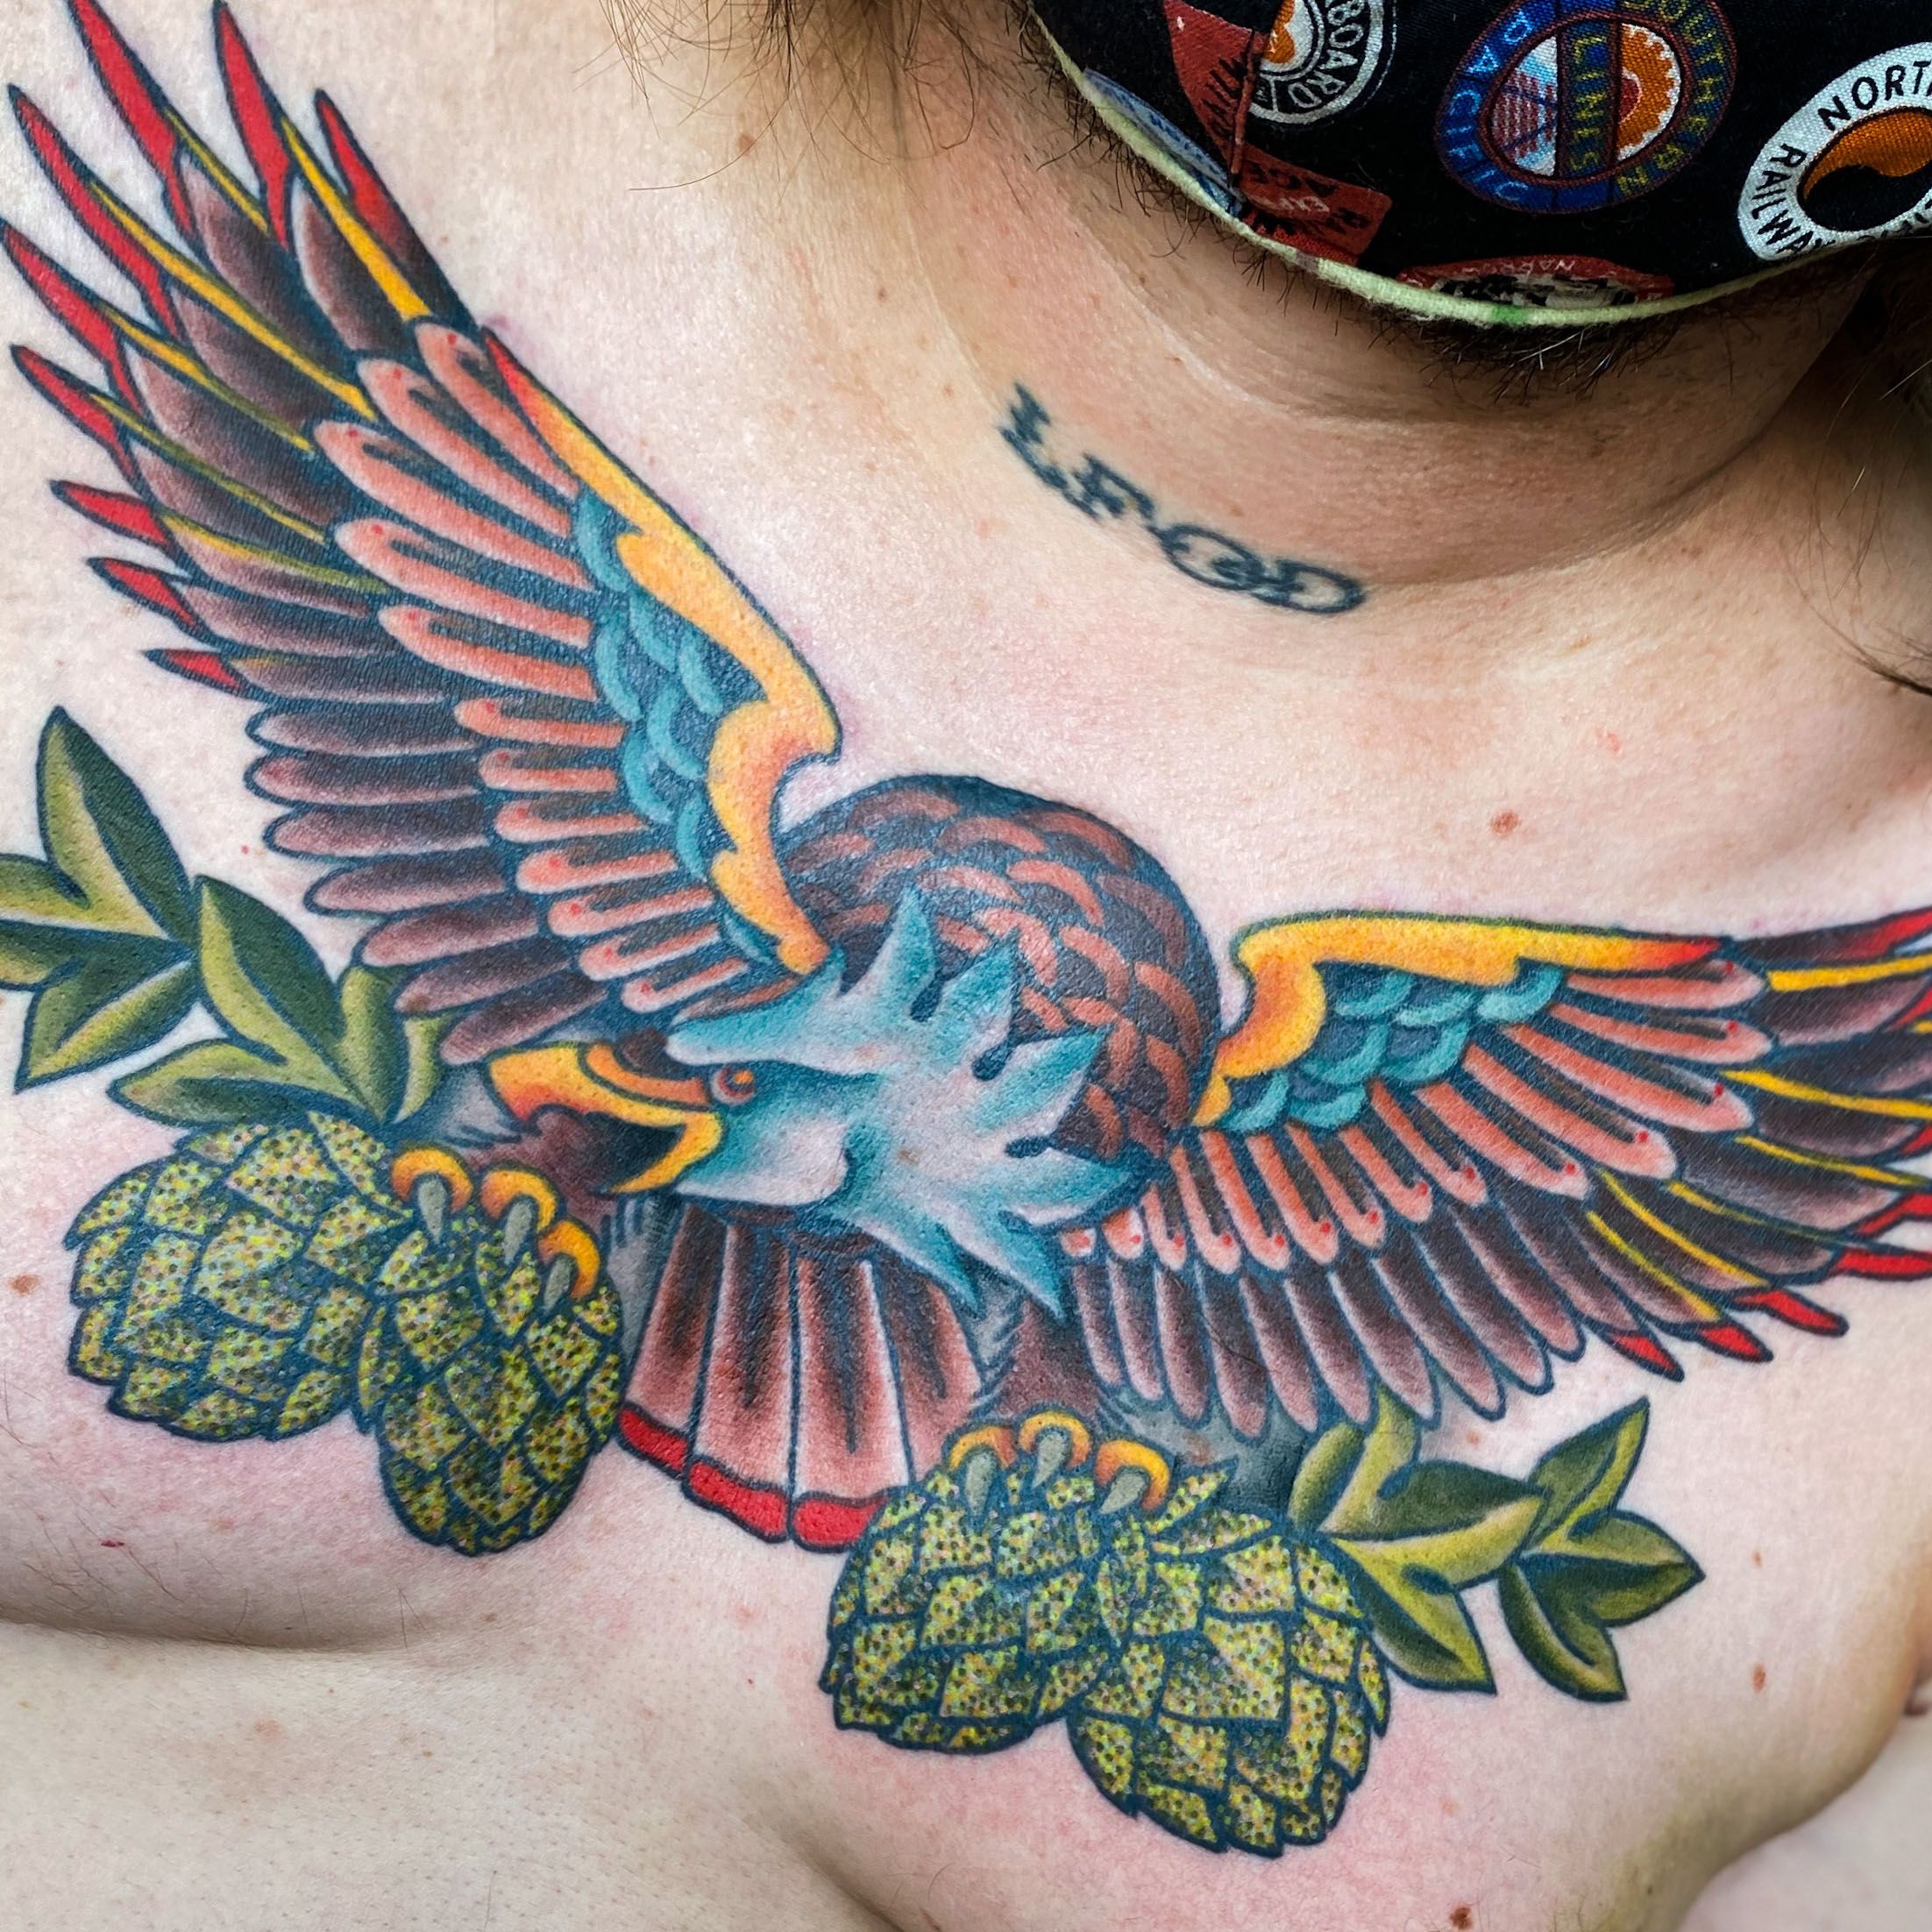 Got my hops tattoo last month what do you guys think Photo was taken  after the session  rCraftBeer